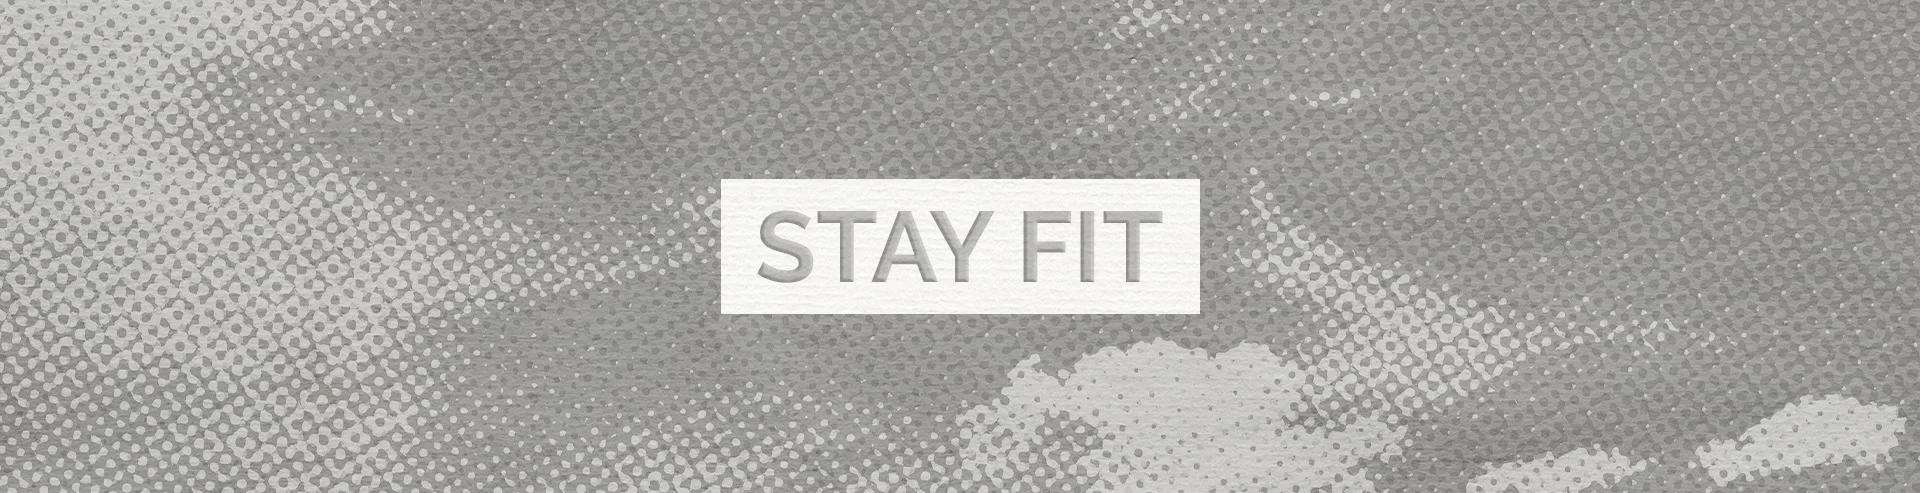 Stay fit